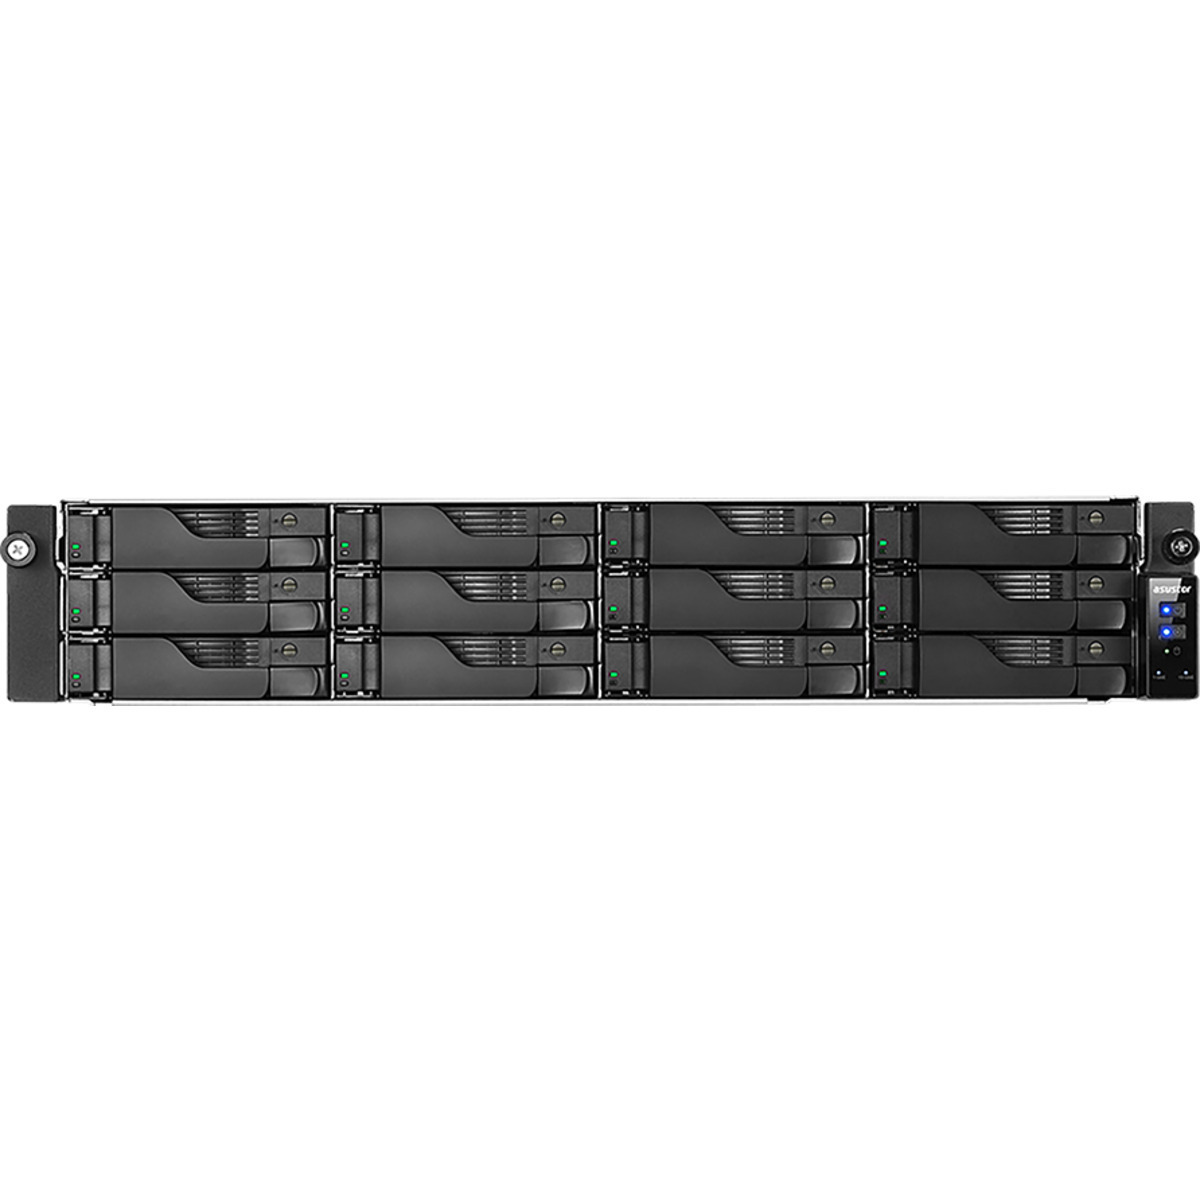 ASUSTOR LOCKERSTOR 12RD AS6512RD 96tb 12-Bay RackMount Multimedia / Power User / Business NAS - Network Attached Storage Device 8x12tb Western Digital Gold WD121KRYZ 3.5 7200rpm SATA 6Gb/s HDD ENTERPRISE Class Drives Installed - Burn-In Tested - FREE RAM UPGRADE LOCKERSTOR 12RD AS6512RD